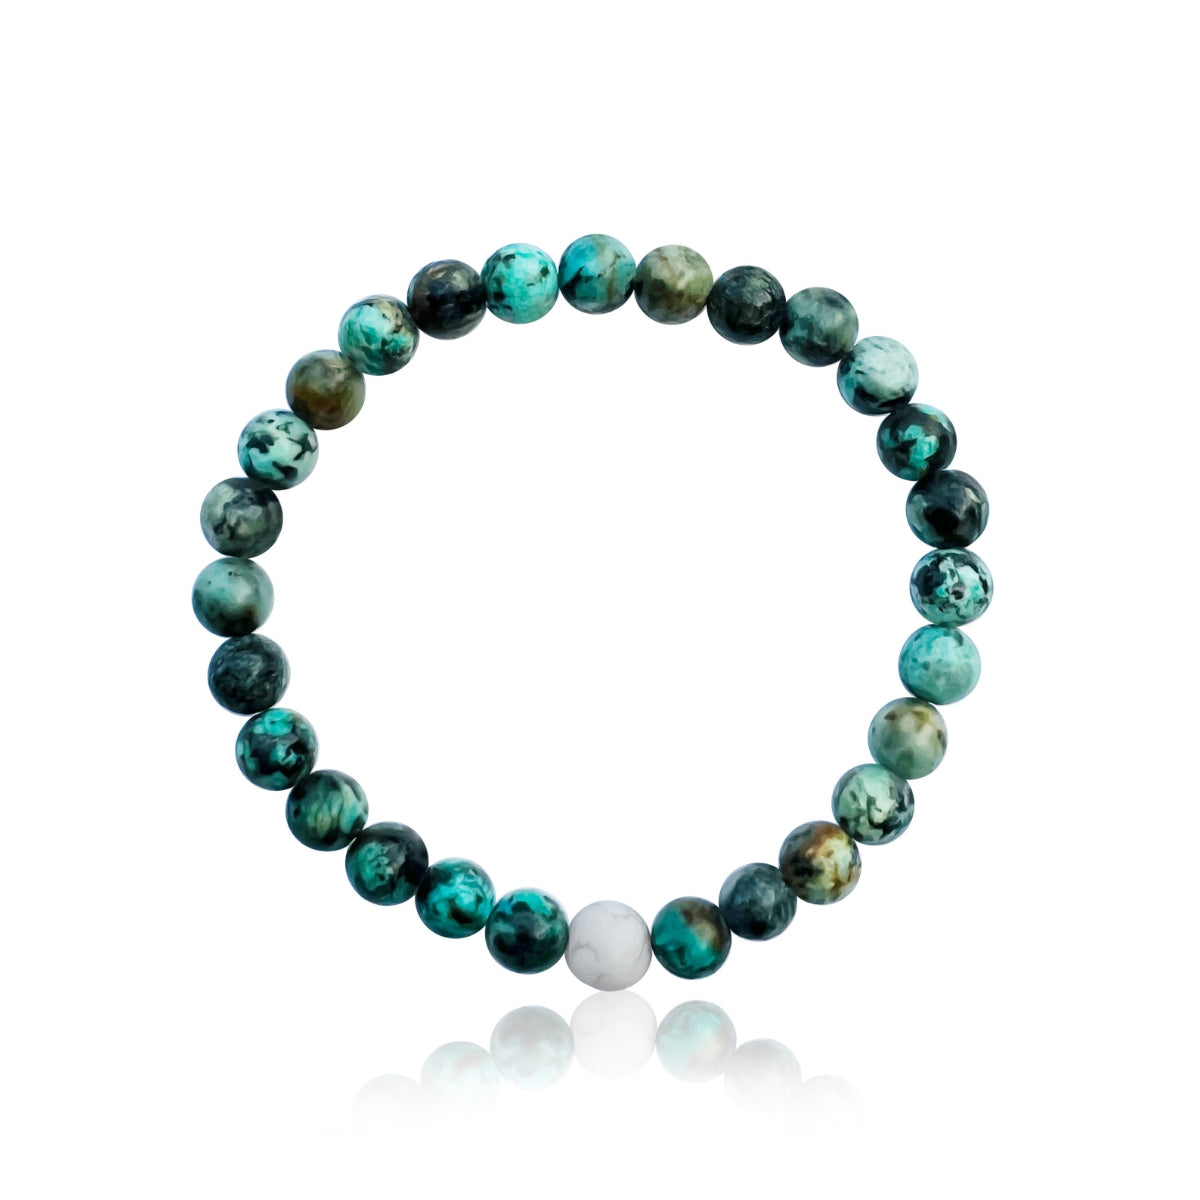 You can't have a better tomorrow if you are thinking about yesterday all the time. Wear this A Better Tomorrow African Turquoise Bracelet as a powerful talisman on your journey to Happiness.